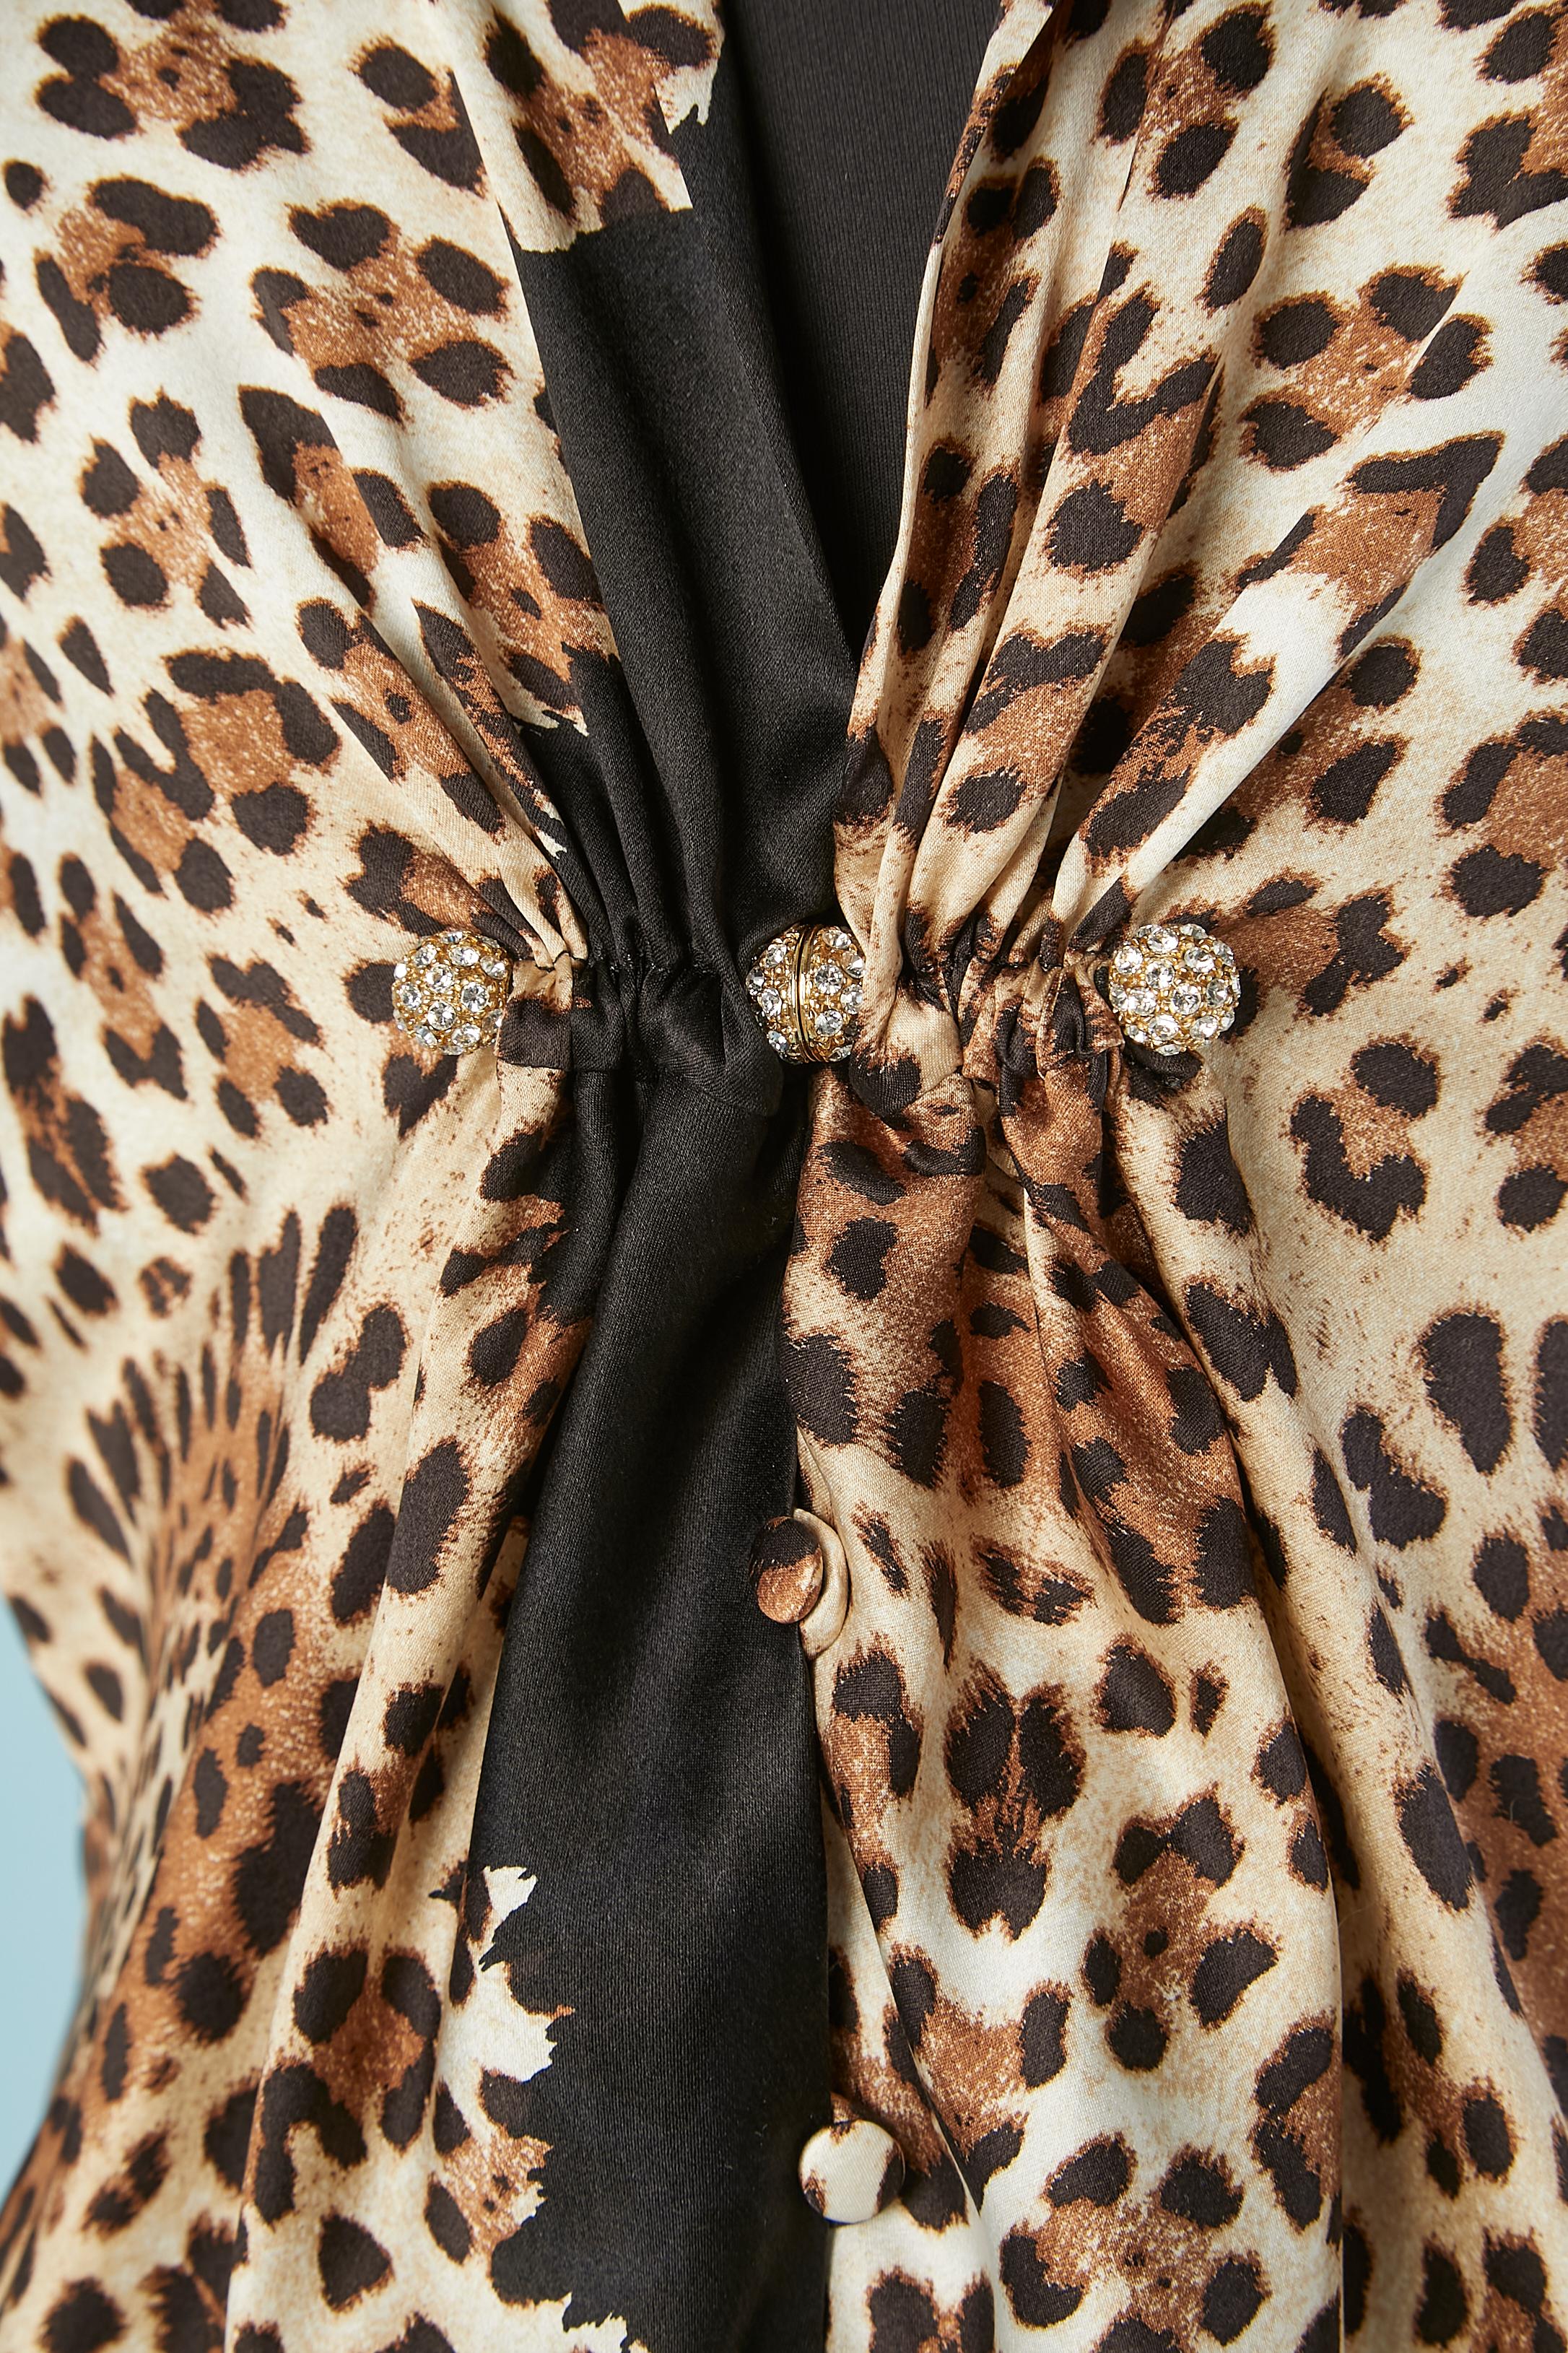 Silk leopard shirt with rhinestone brooch in the middle front. The brooch can be screw and unscrewed to open and close the shirt . Branded fabric . Authenticity hologram.
SIZE 44 (It) 40 (Fr) M/L 